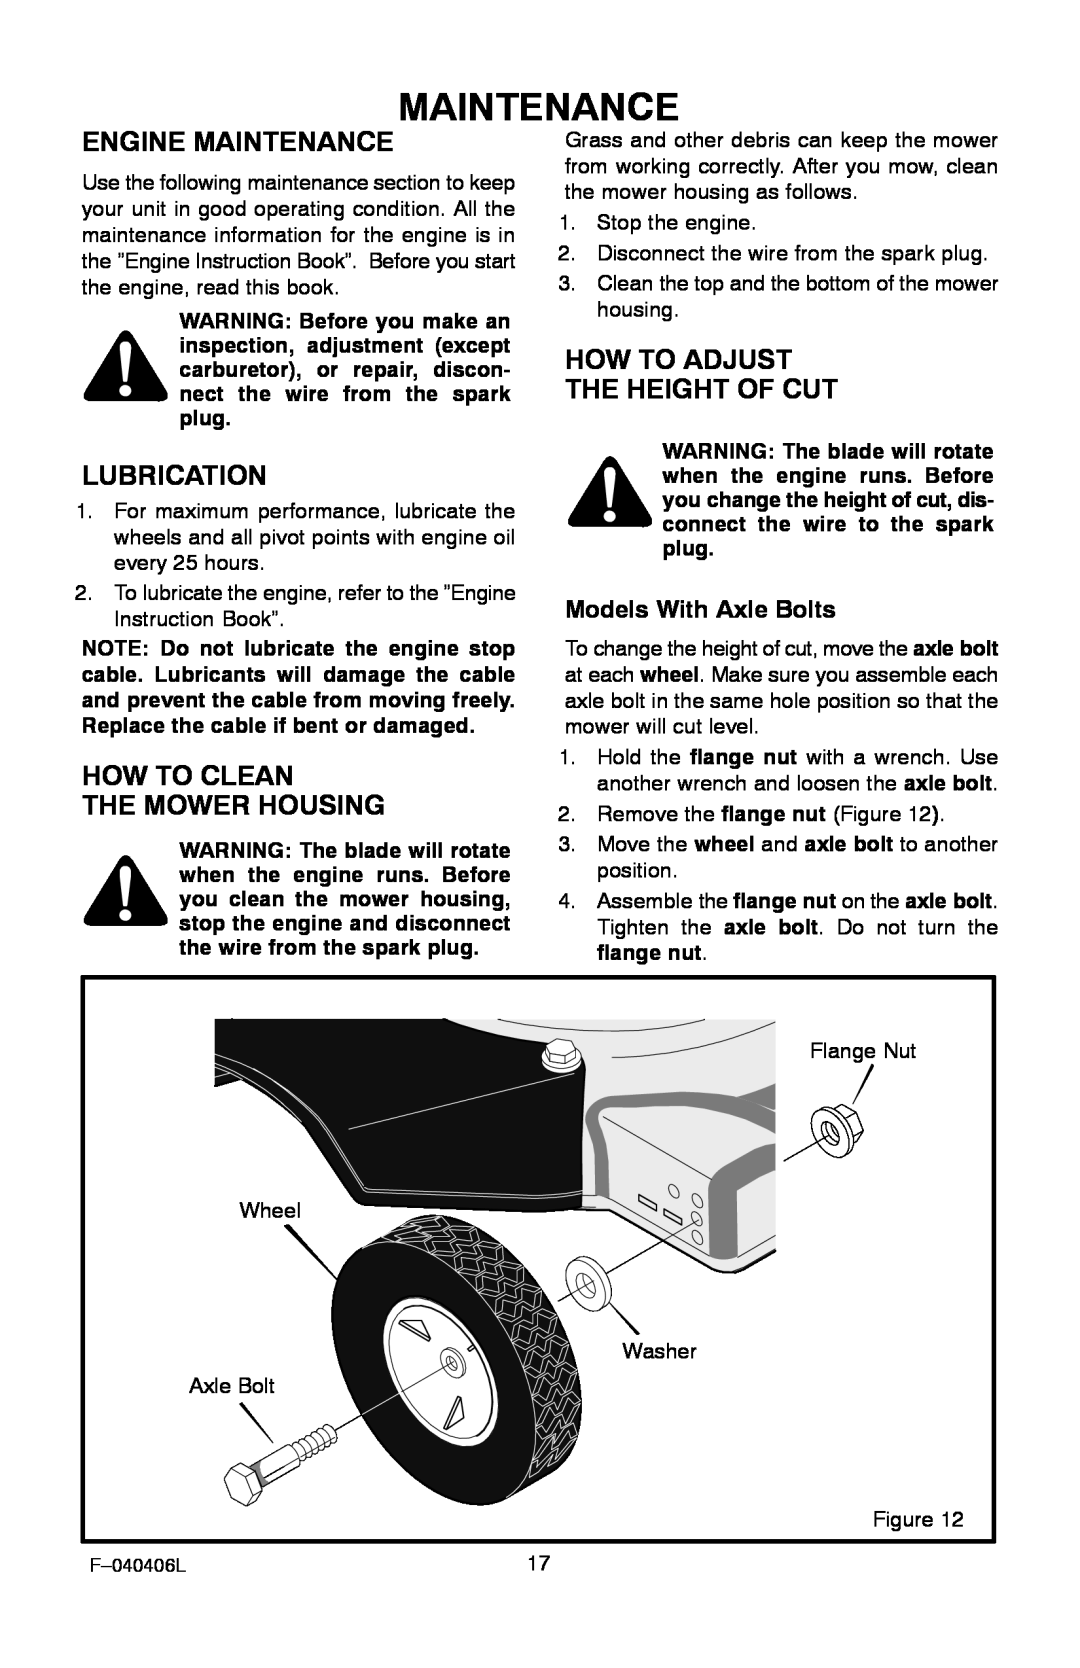 Murray 20-inch Engine Maintenance, How To Adjust, The Height Of Cut, Lubrication, How To Clean, The Mower Housing 